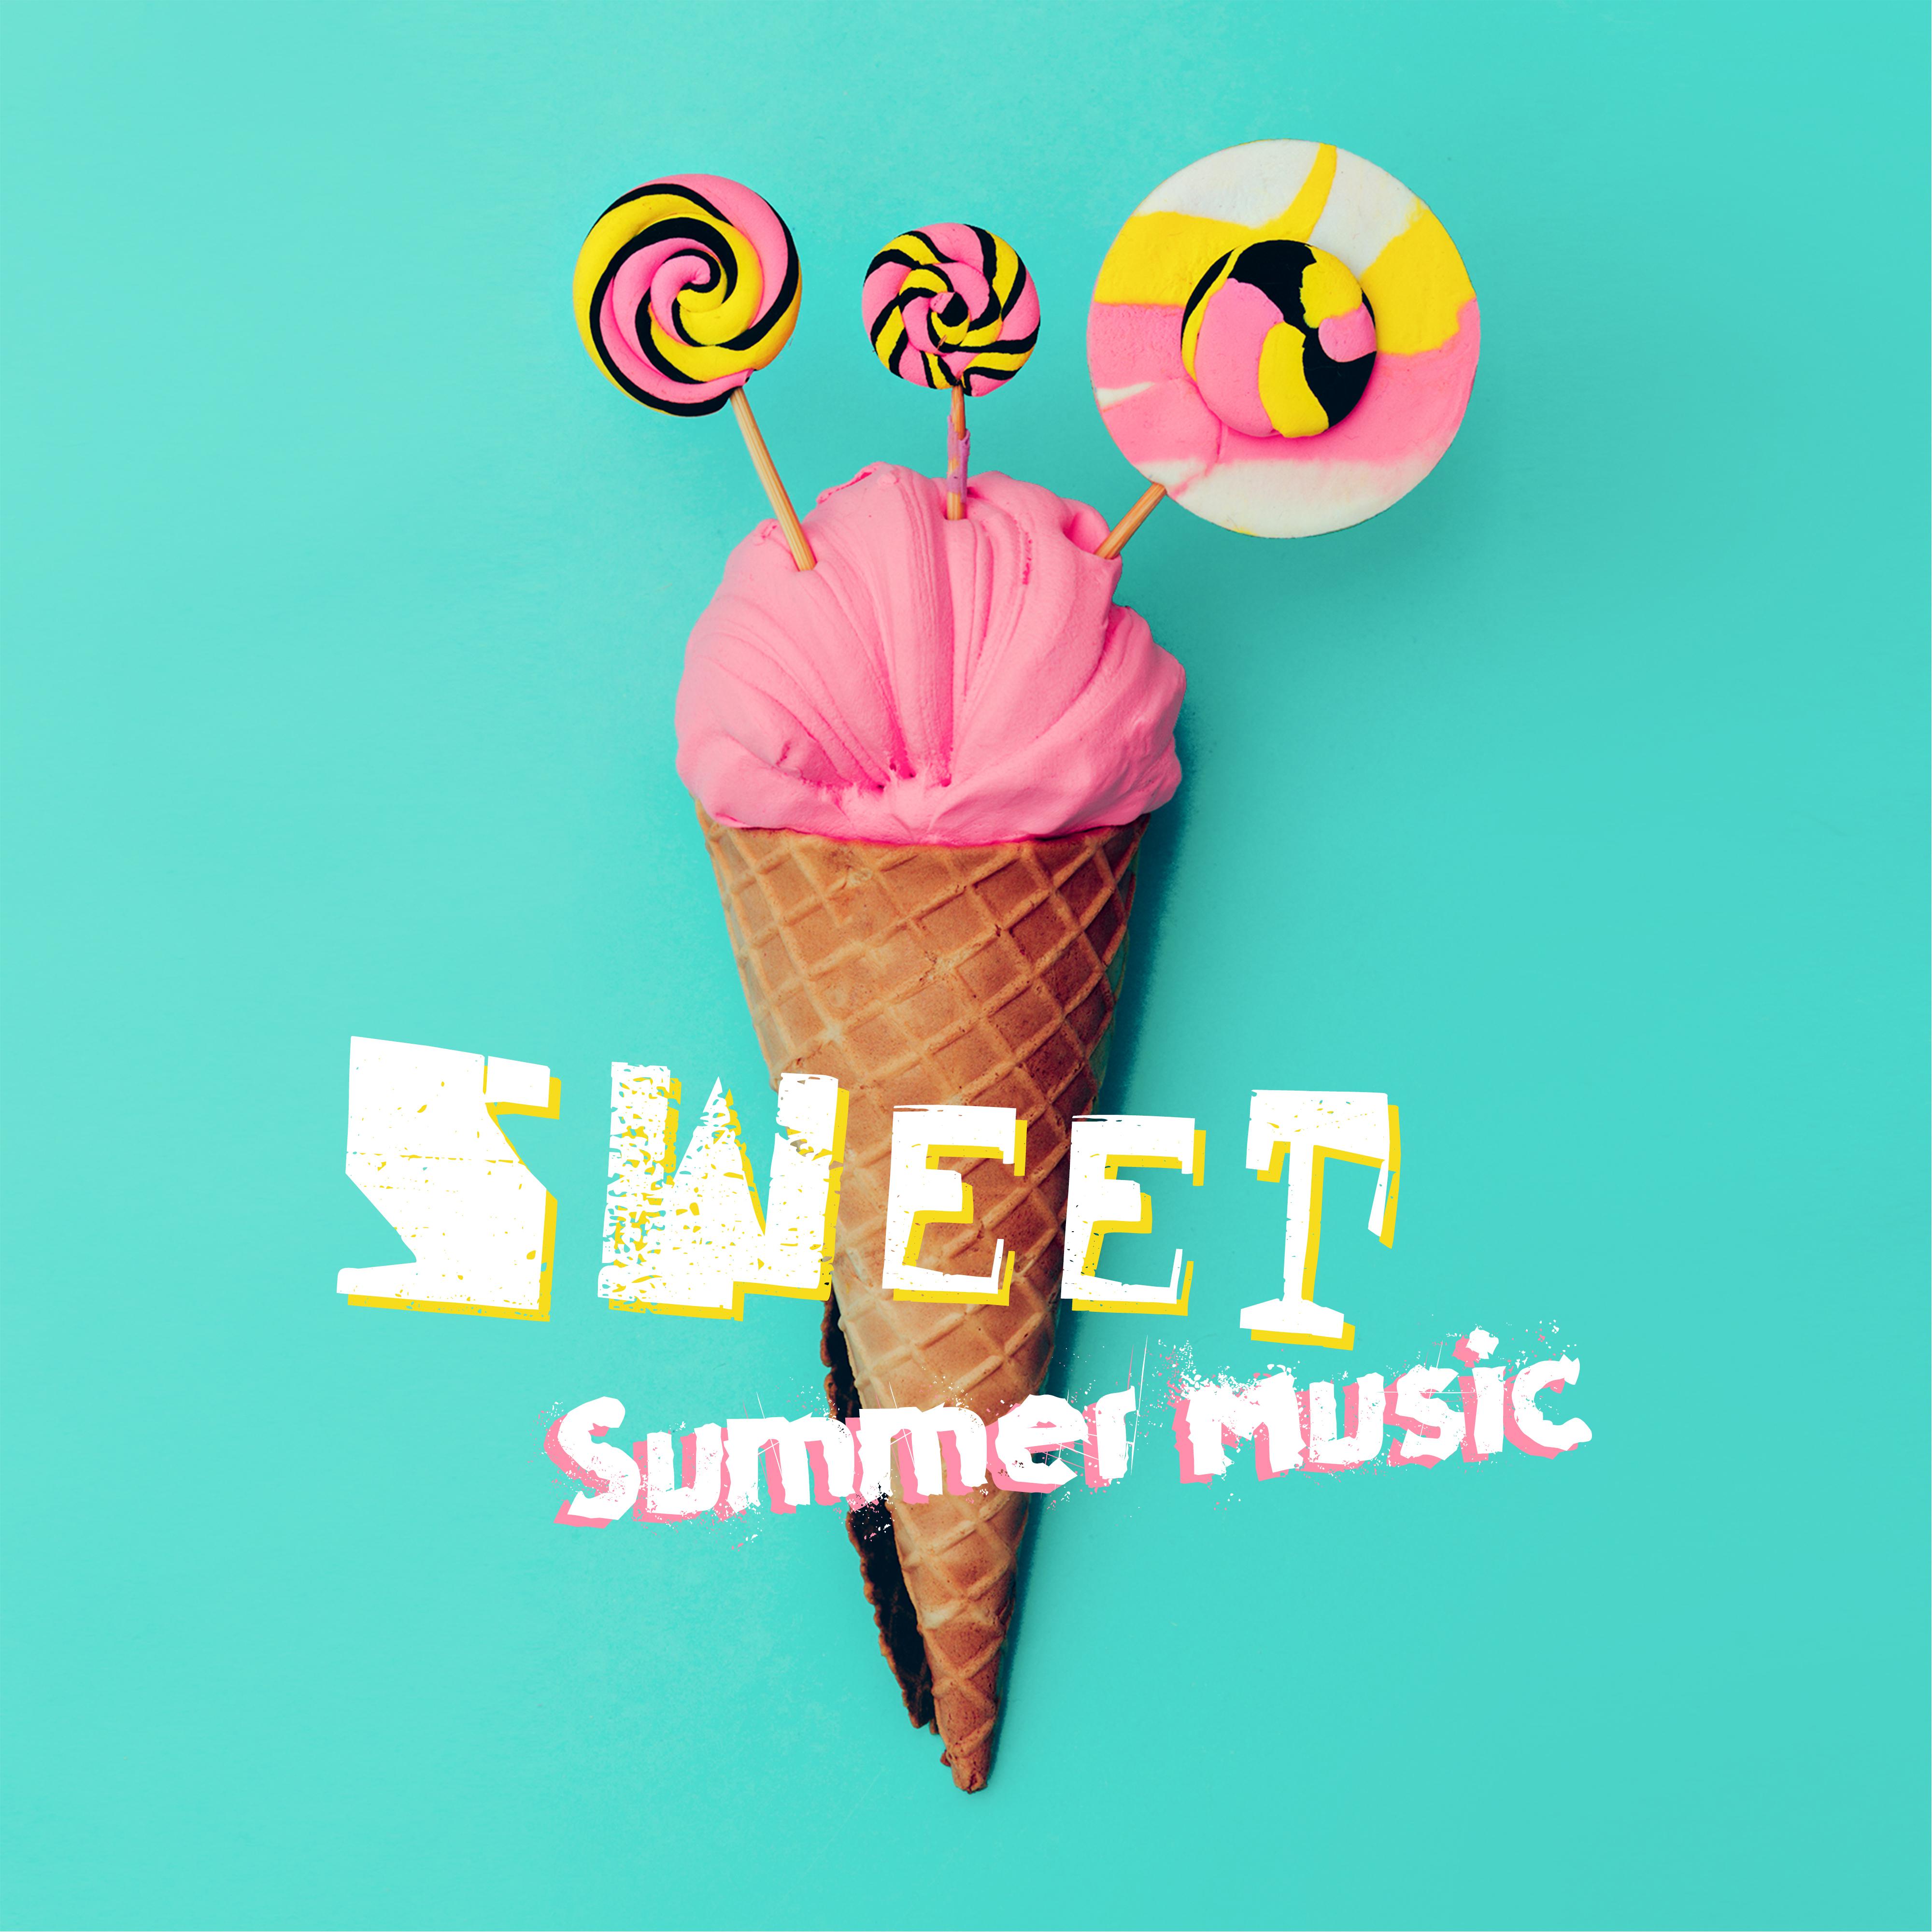 Sweet Summer Music - Ibiza Chilled Mix, Summer Songs 2019, Relax, Beach Music, Summertime & Chill, Holiday Hits, Chilled House Lounge